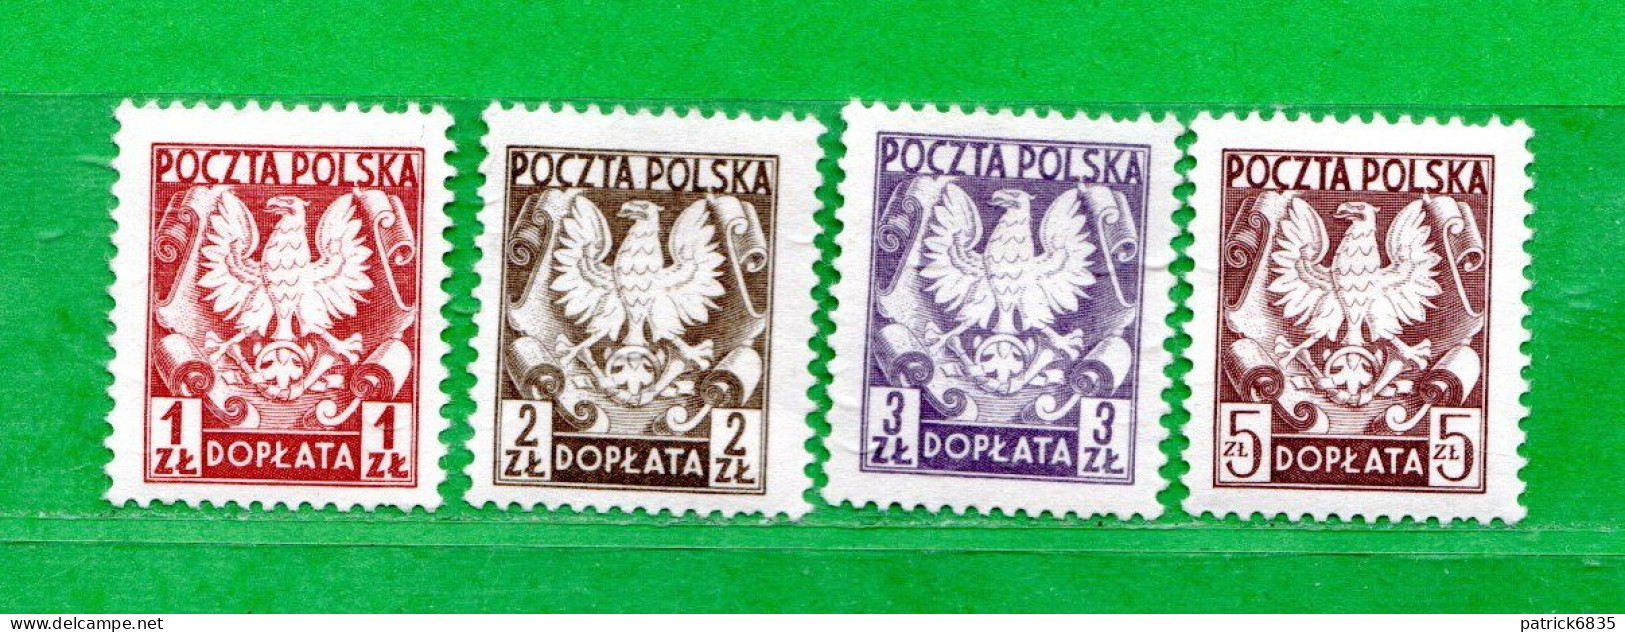 (N) POLONIA ** - SEGNATASSE - TAXE - 1980 -  Yv. 146 à 149 .  MNH** Come Scansione - Postage Due